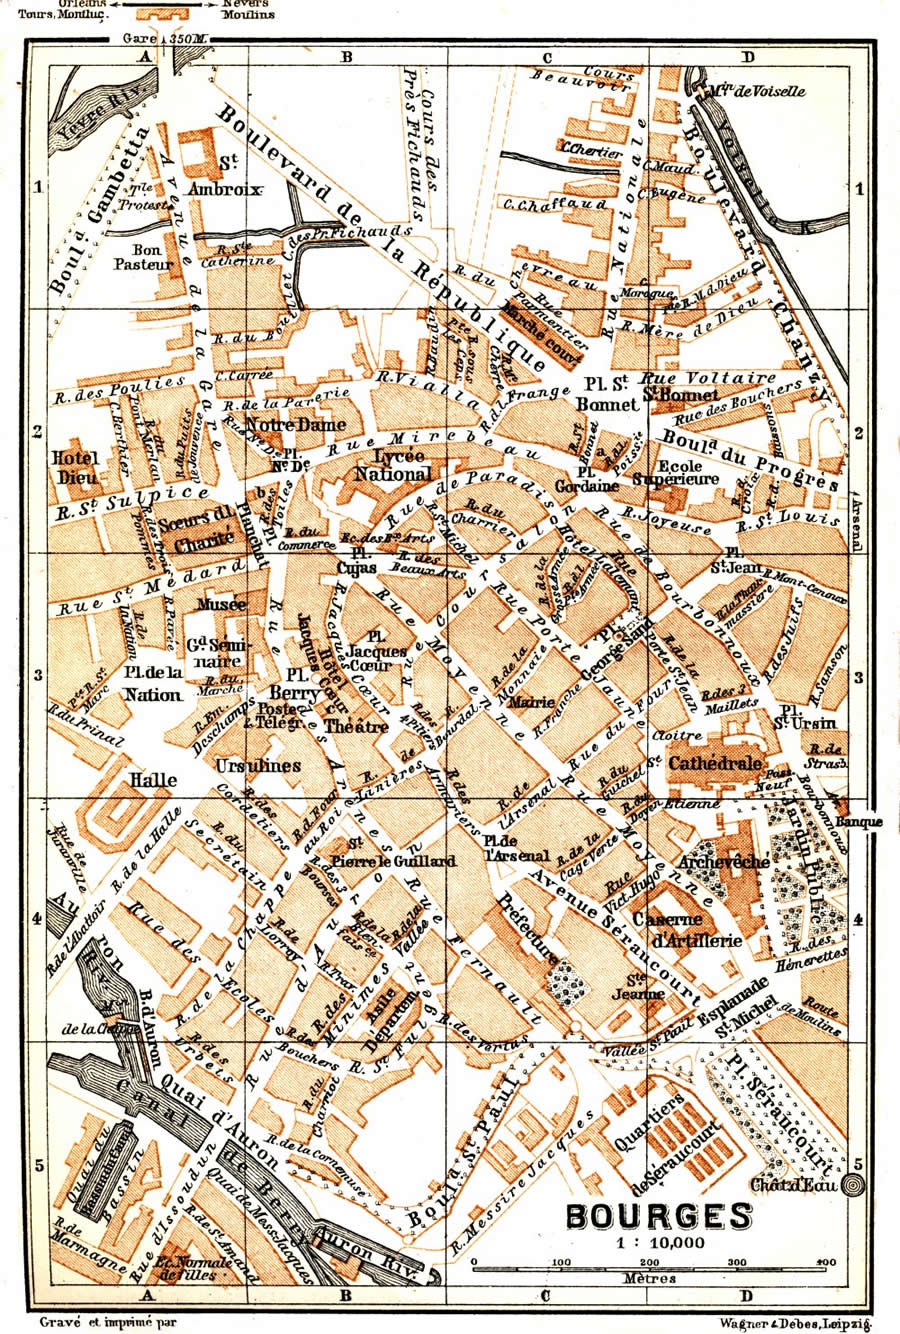 Bourges map 1899